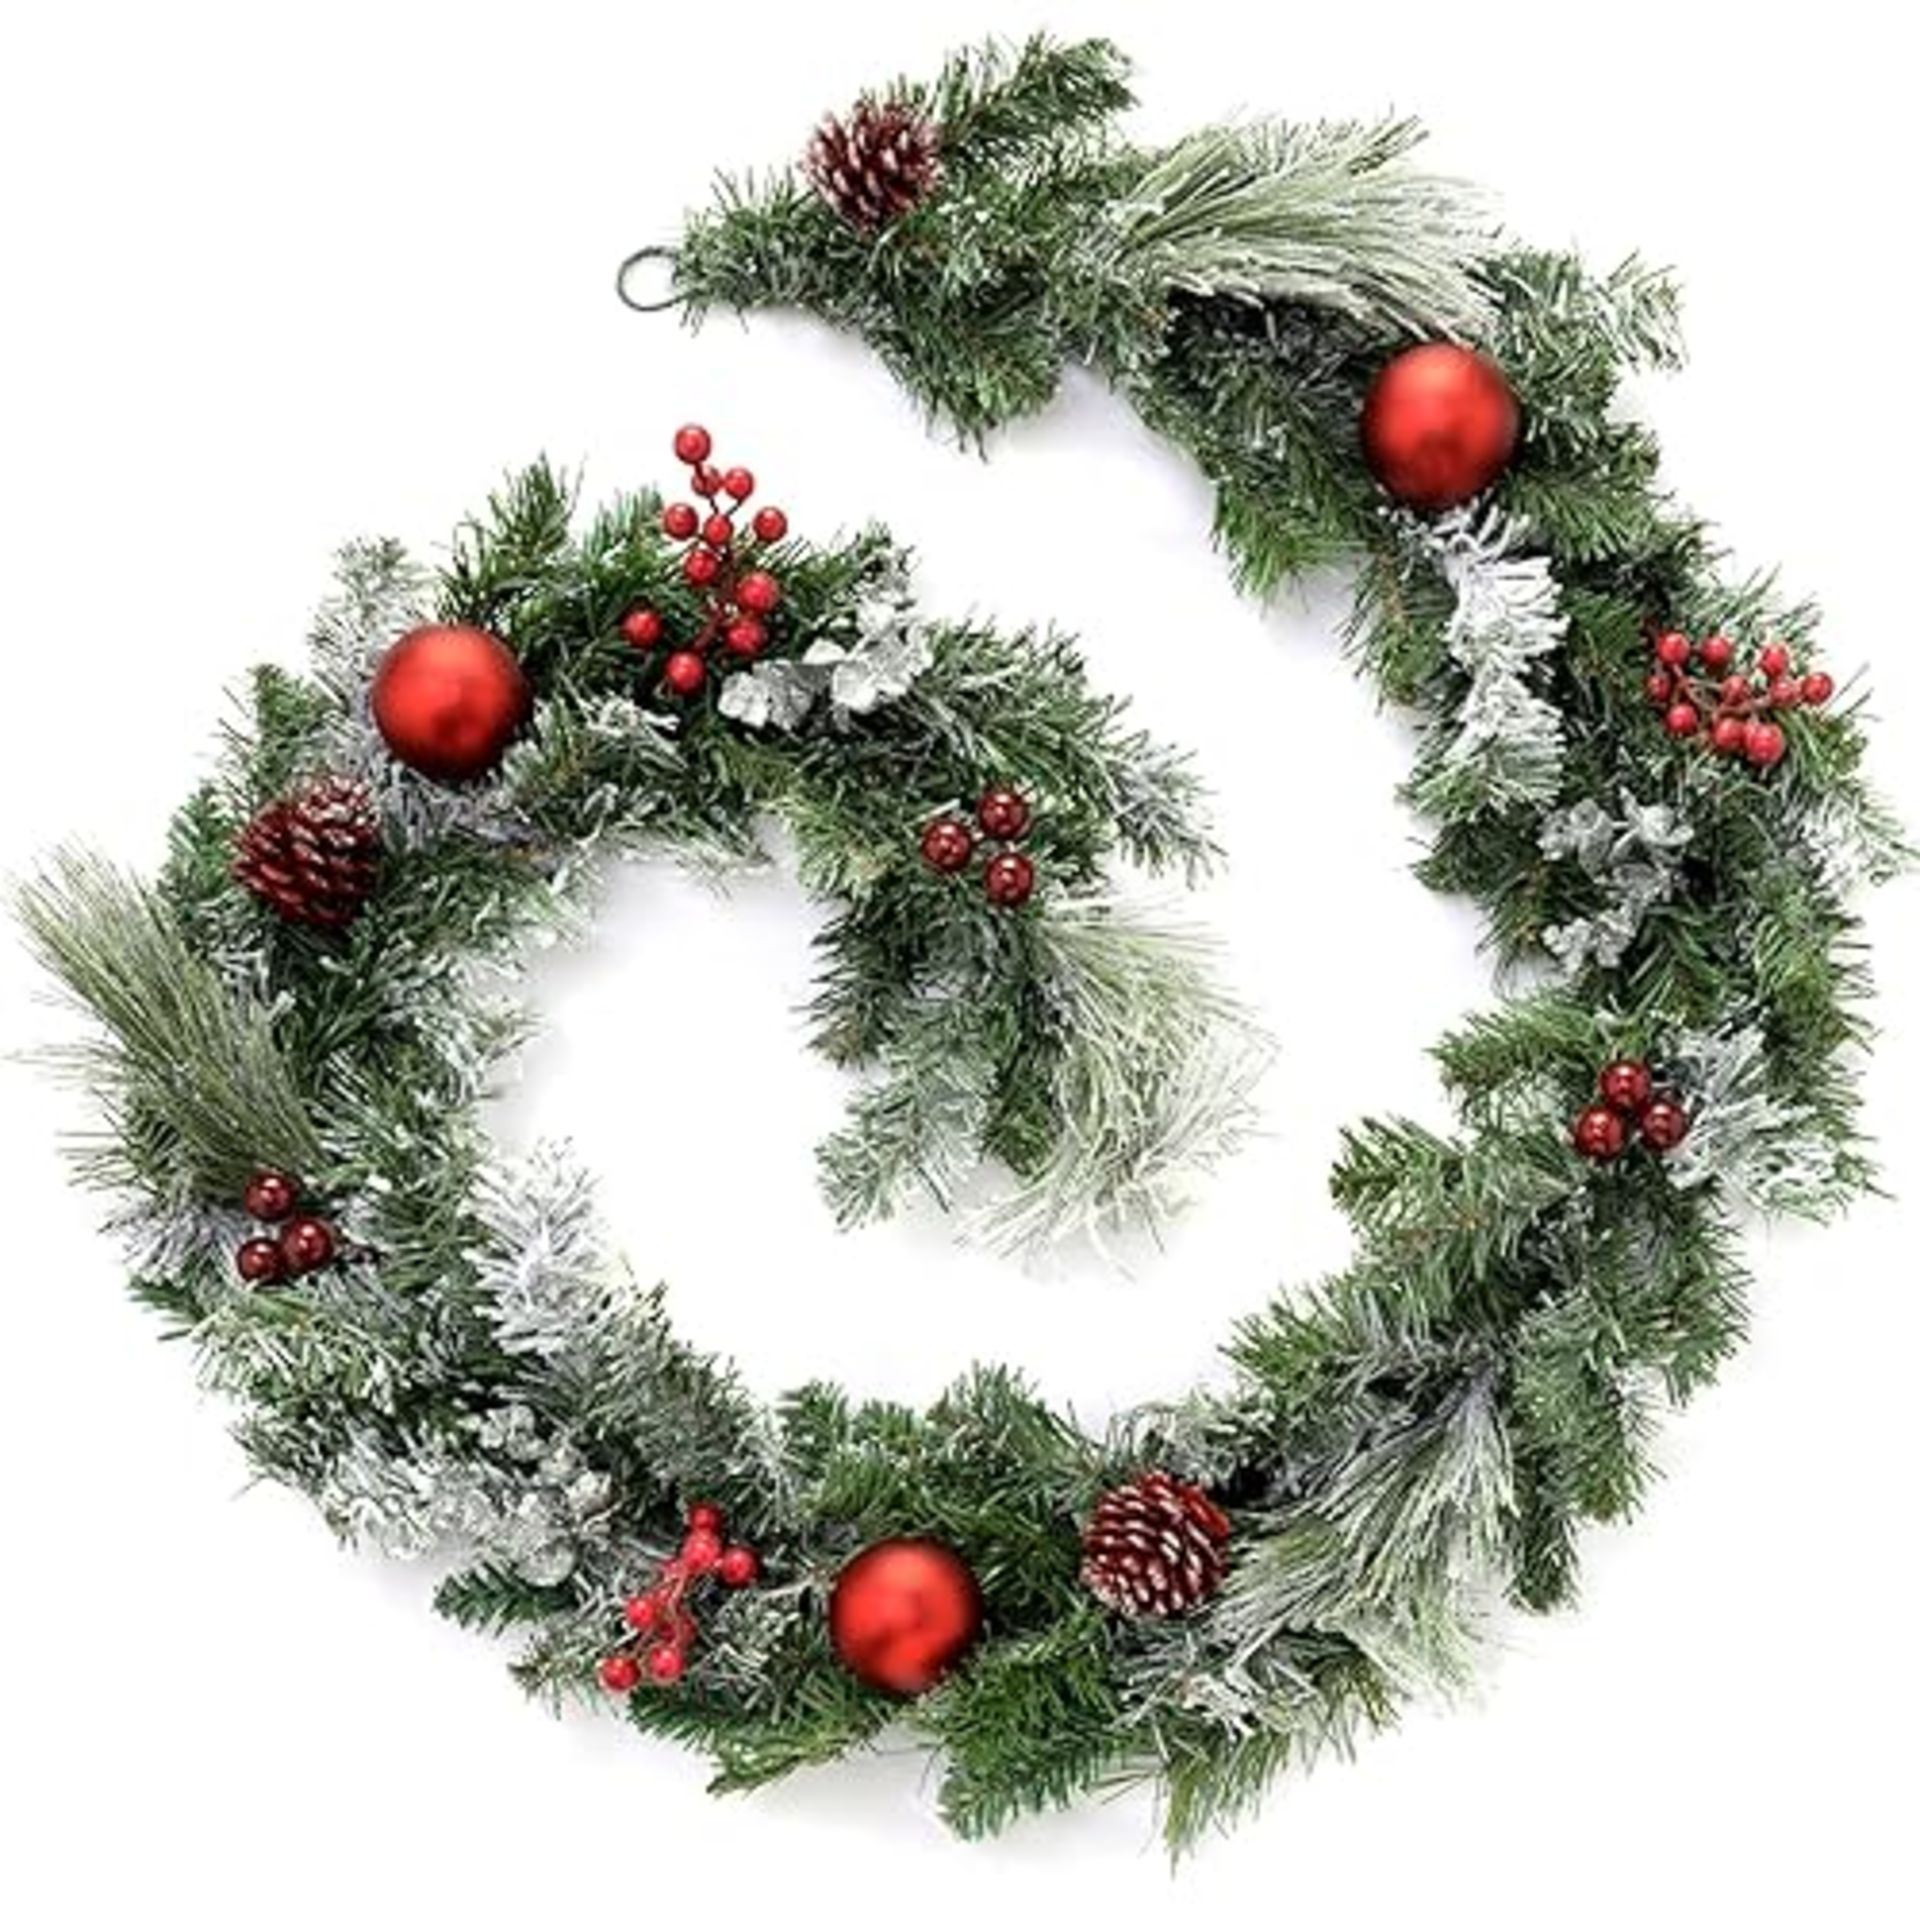 WeRChristmas Frosted Decorated Garland Christmas Decoration, 6 feet - Red